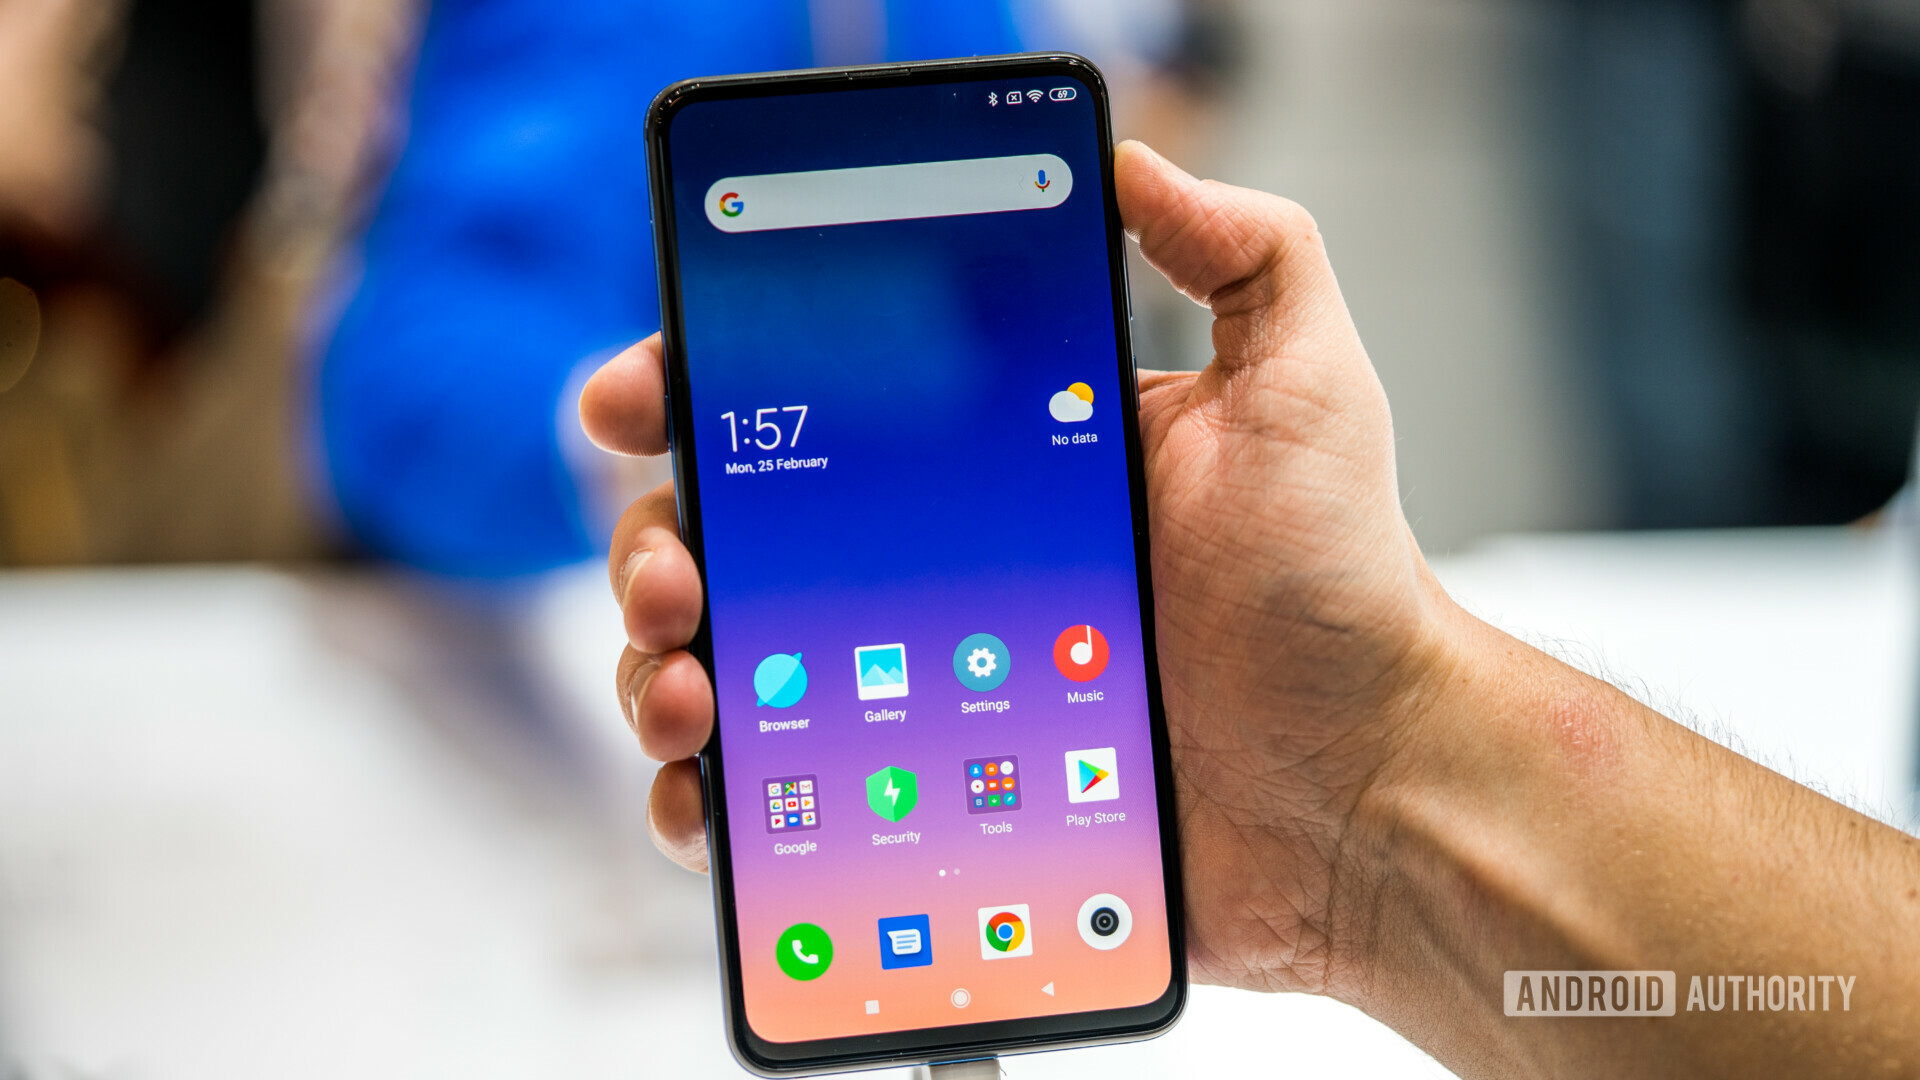 The Xiaomi Mi Mix 3 5G will be joined by the Xiaomi Mi 9 Pro 5G.